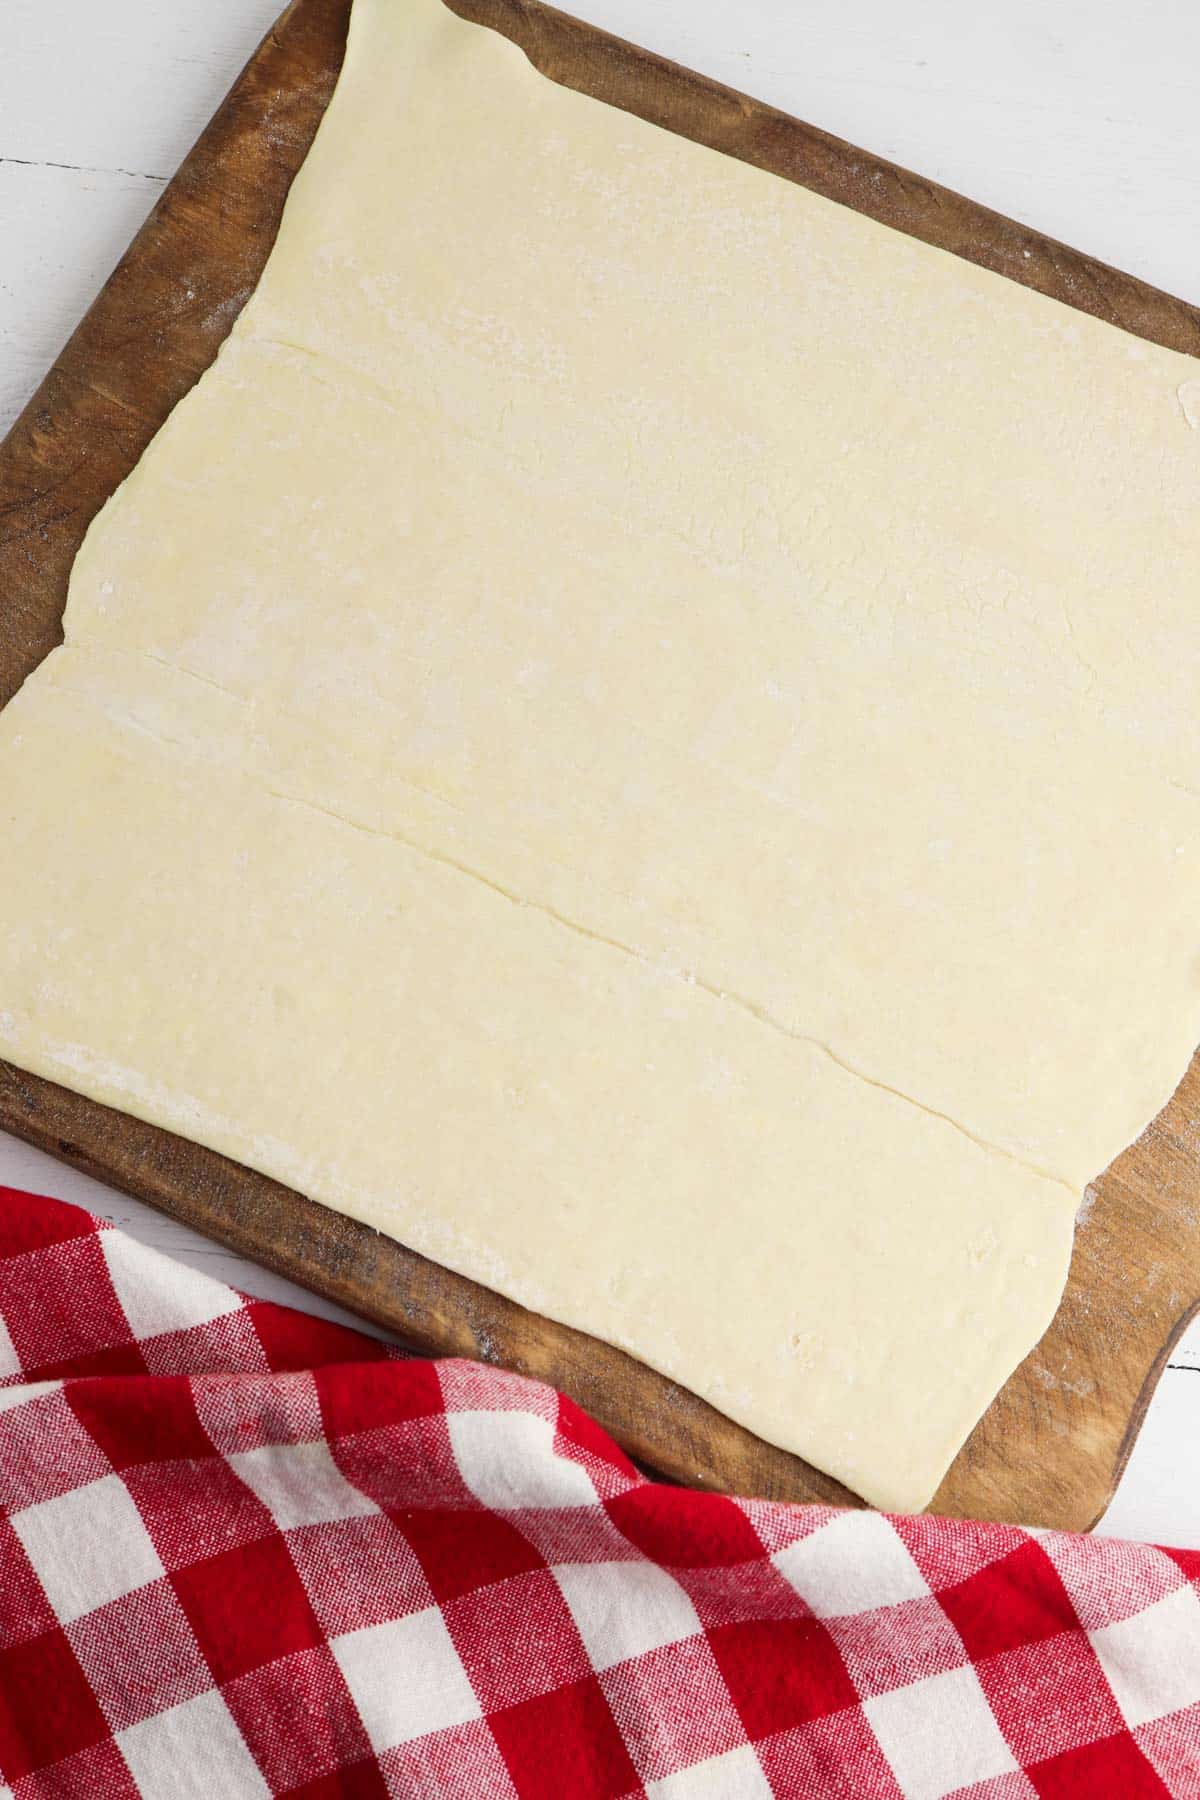 A sheet of pastry dough on a cutting board.